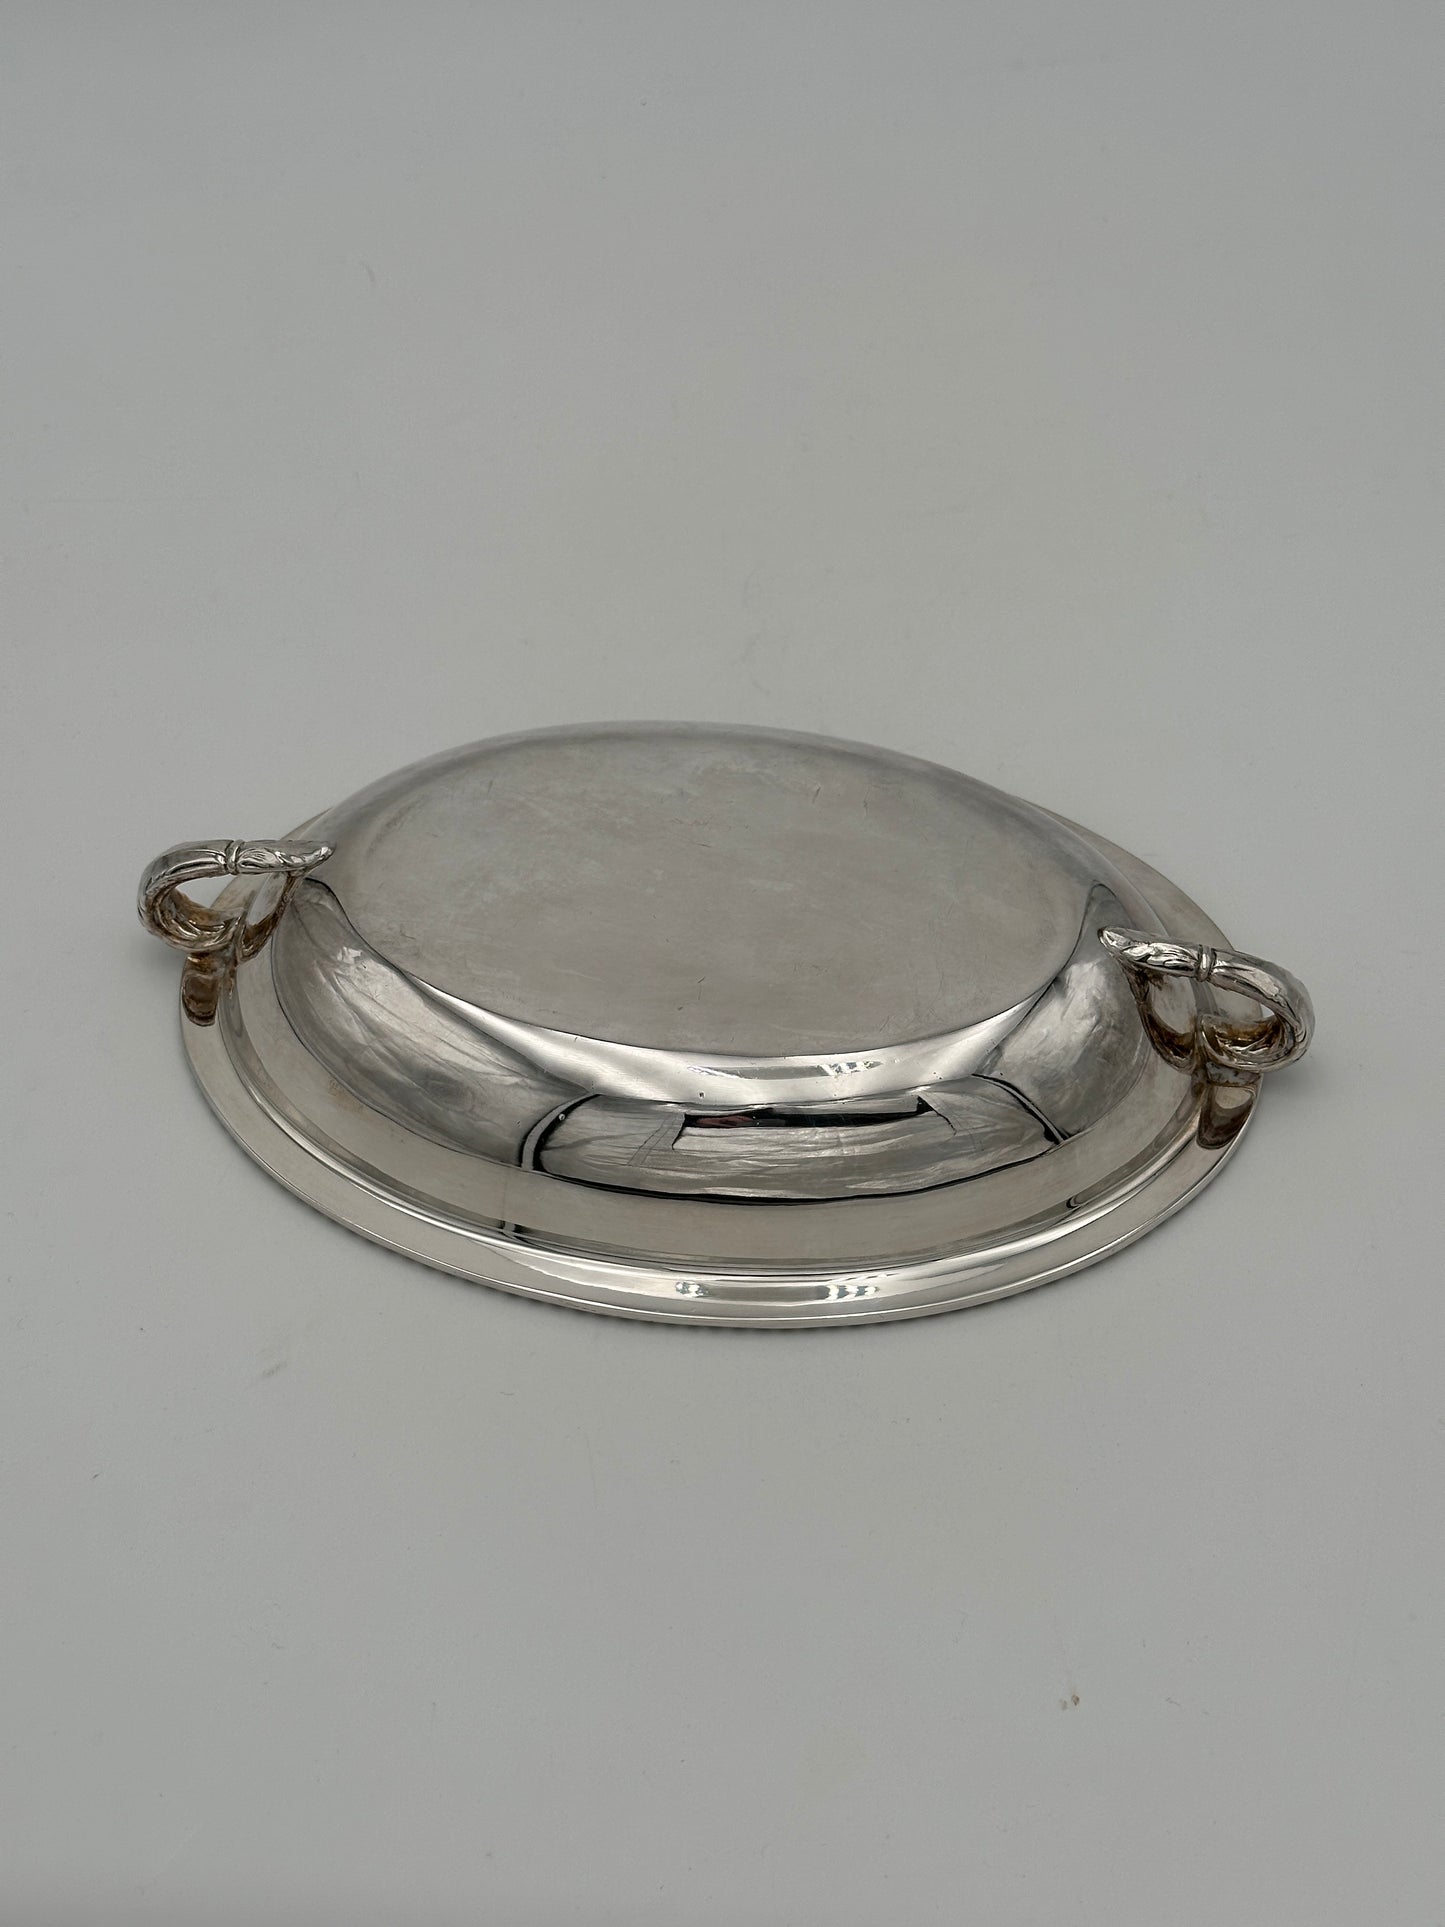 Silver-Plated Shallow Oval Bowl with Textured Edge & Handles